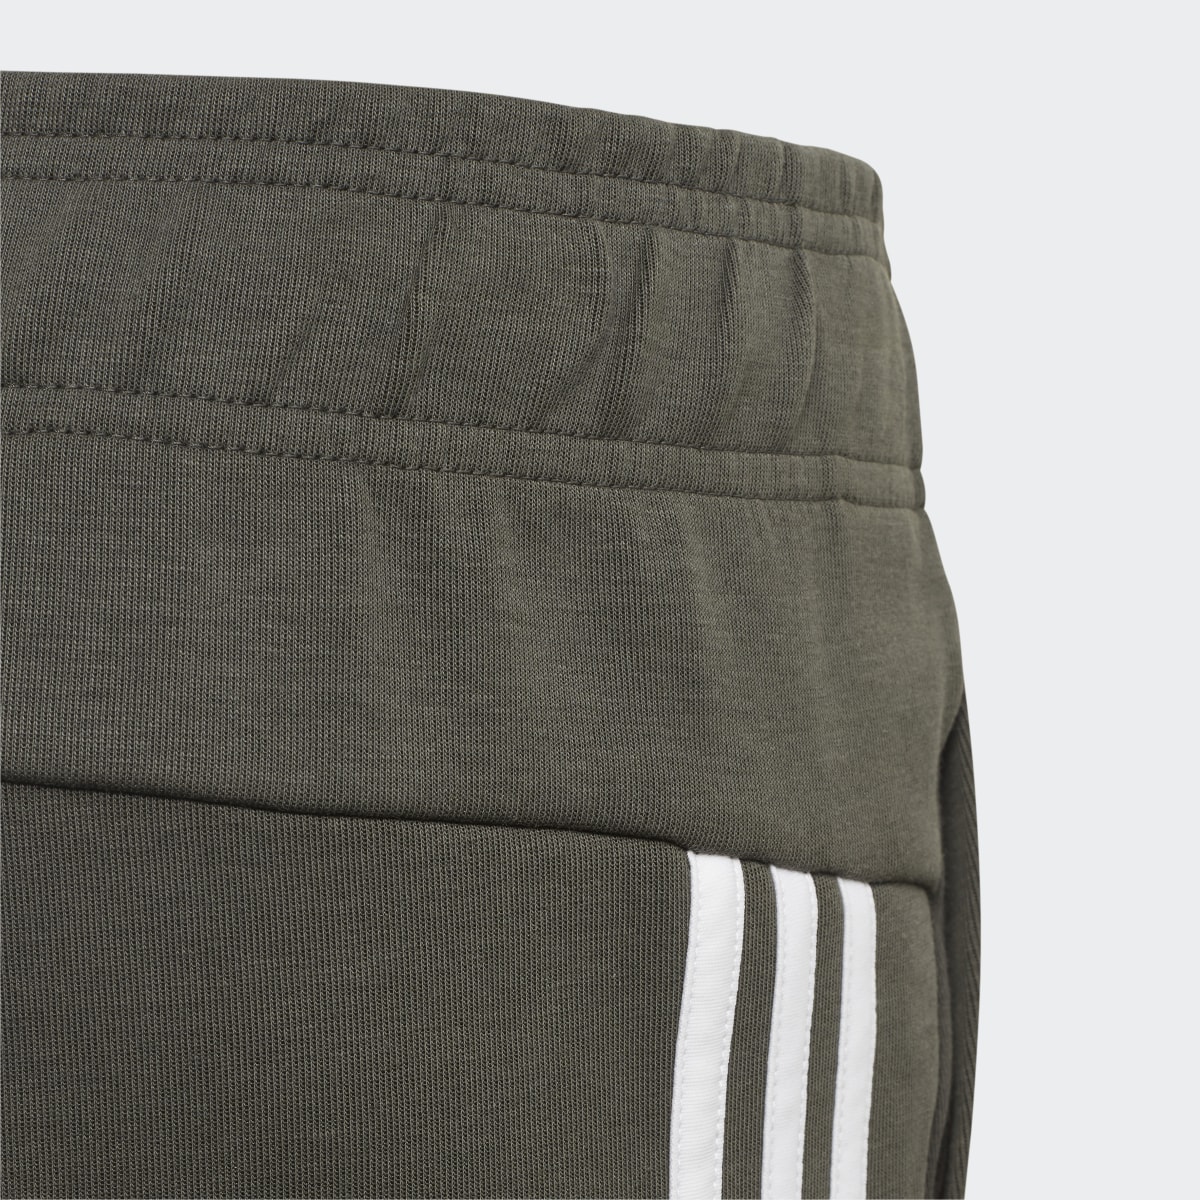 Adidas Must Haves 3-Stripes Tracksuit Bottoms. 5